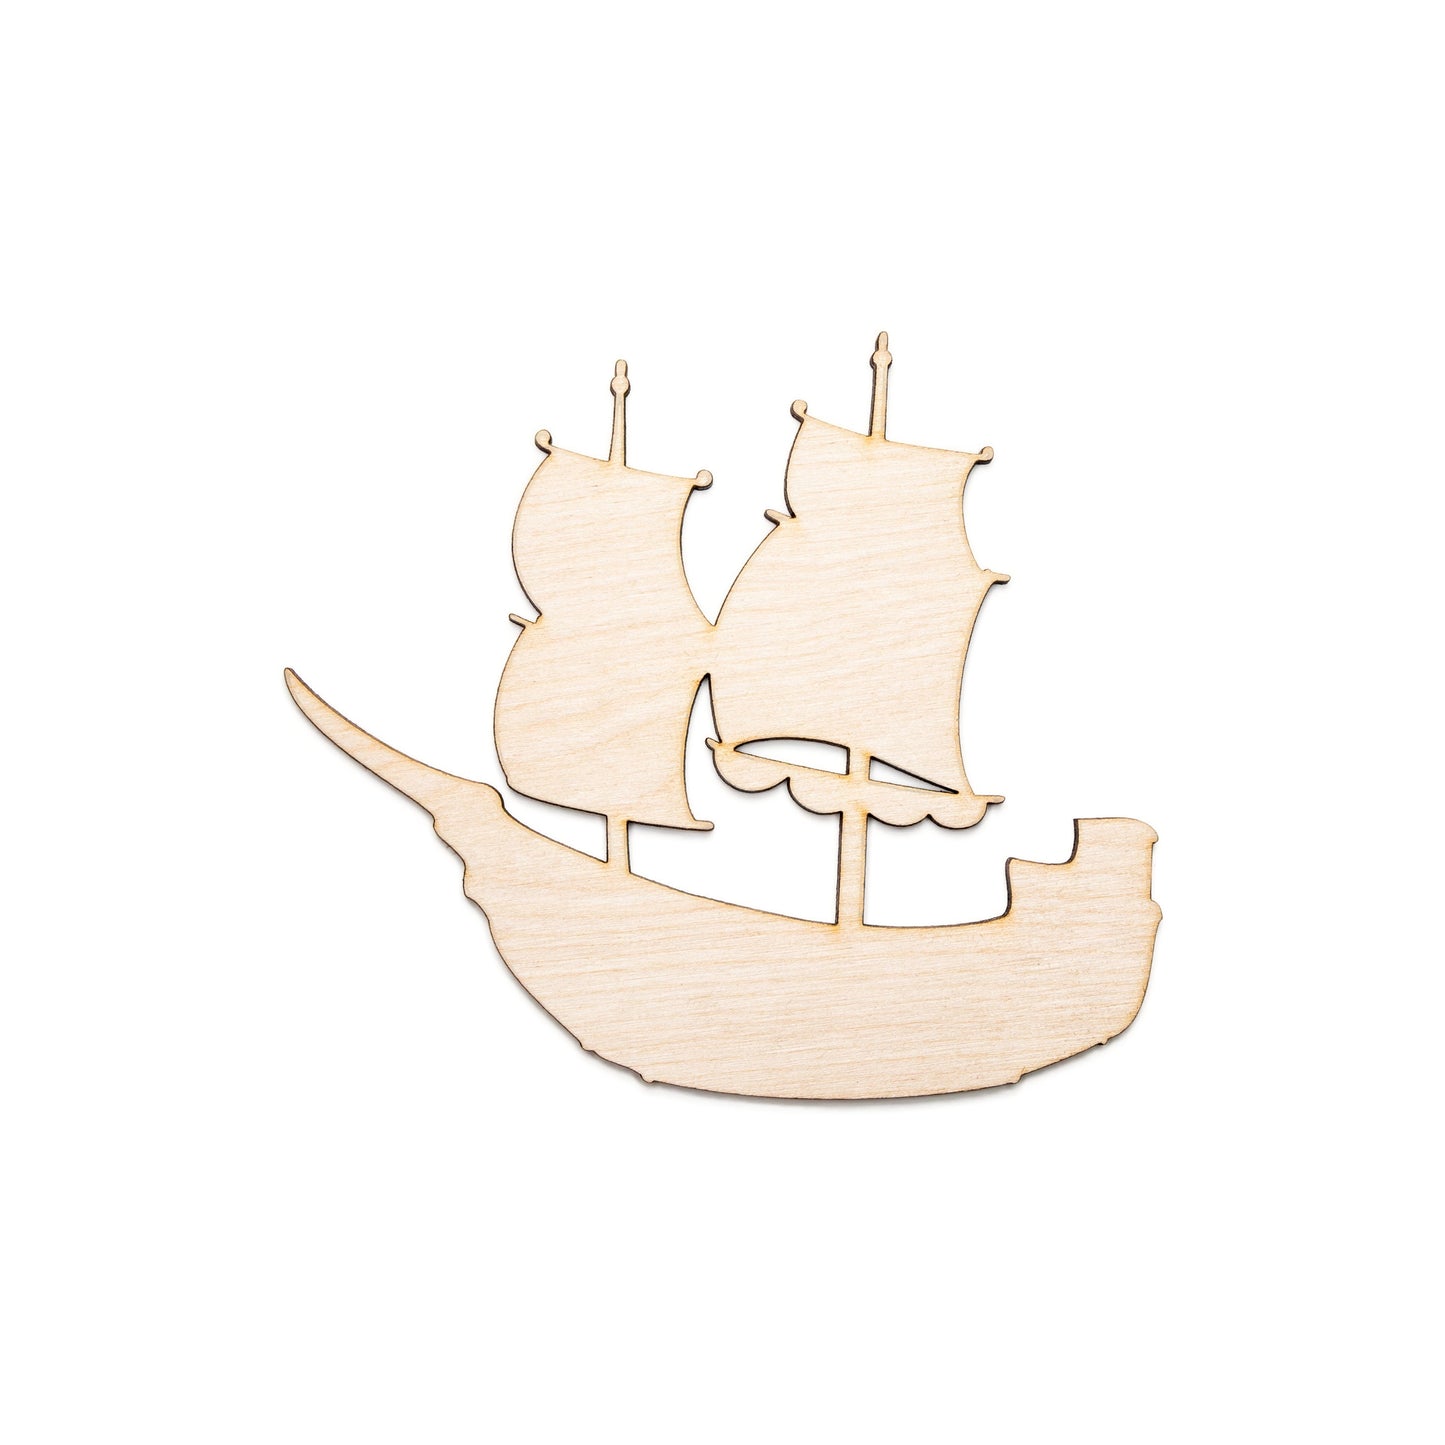 Pirate Ship-Blank Wood Cutout-Old Ship Wood Decor-Nautical Decor-Various Sizes-Blank Wood Ship-Pirate Party Theme Decor-Boats And Sails